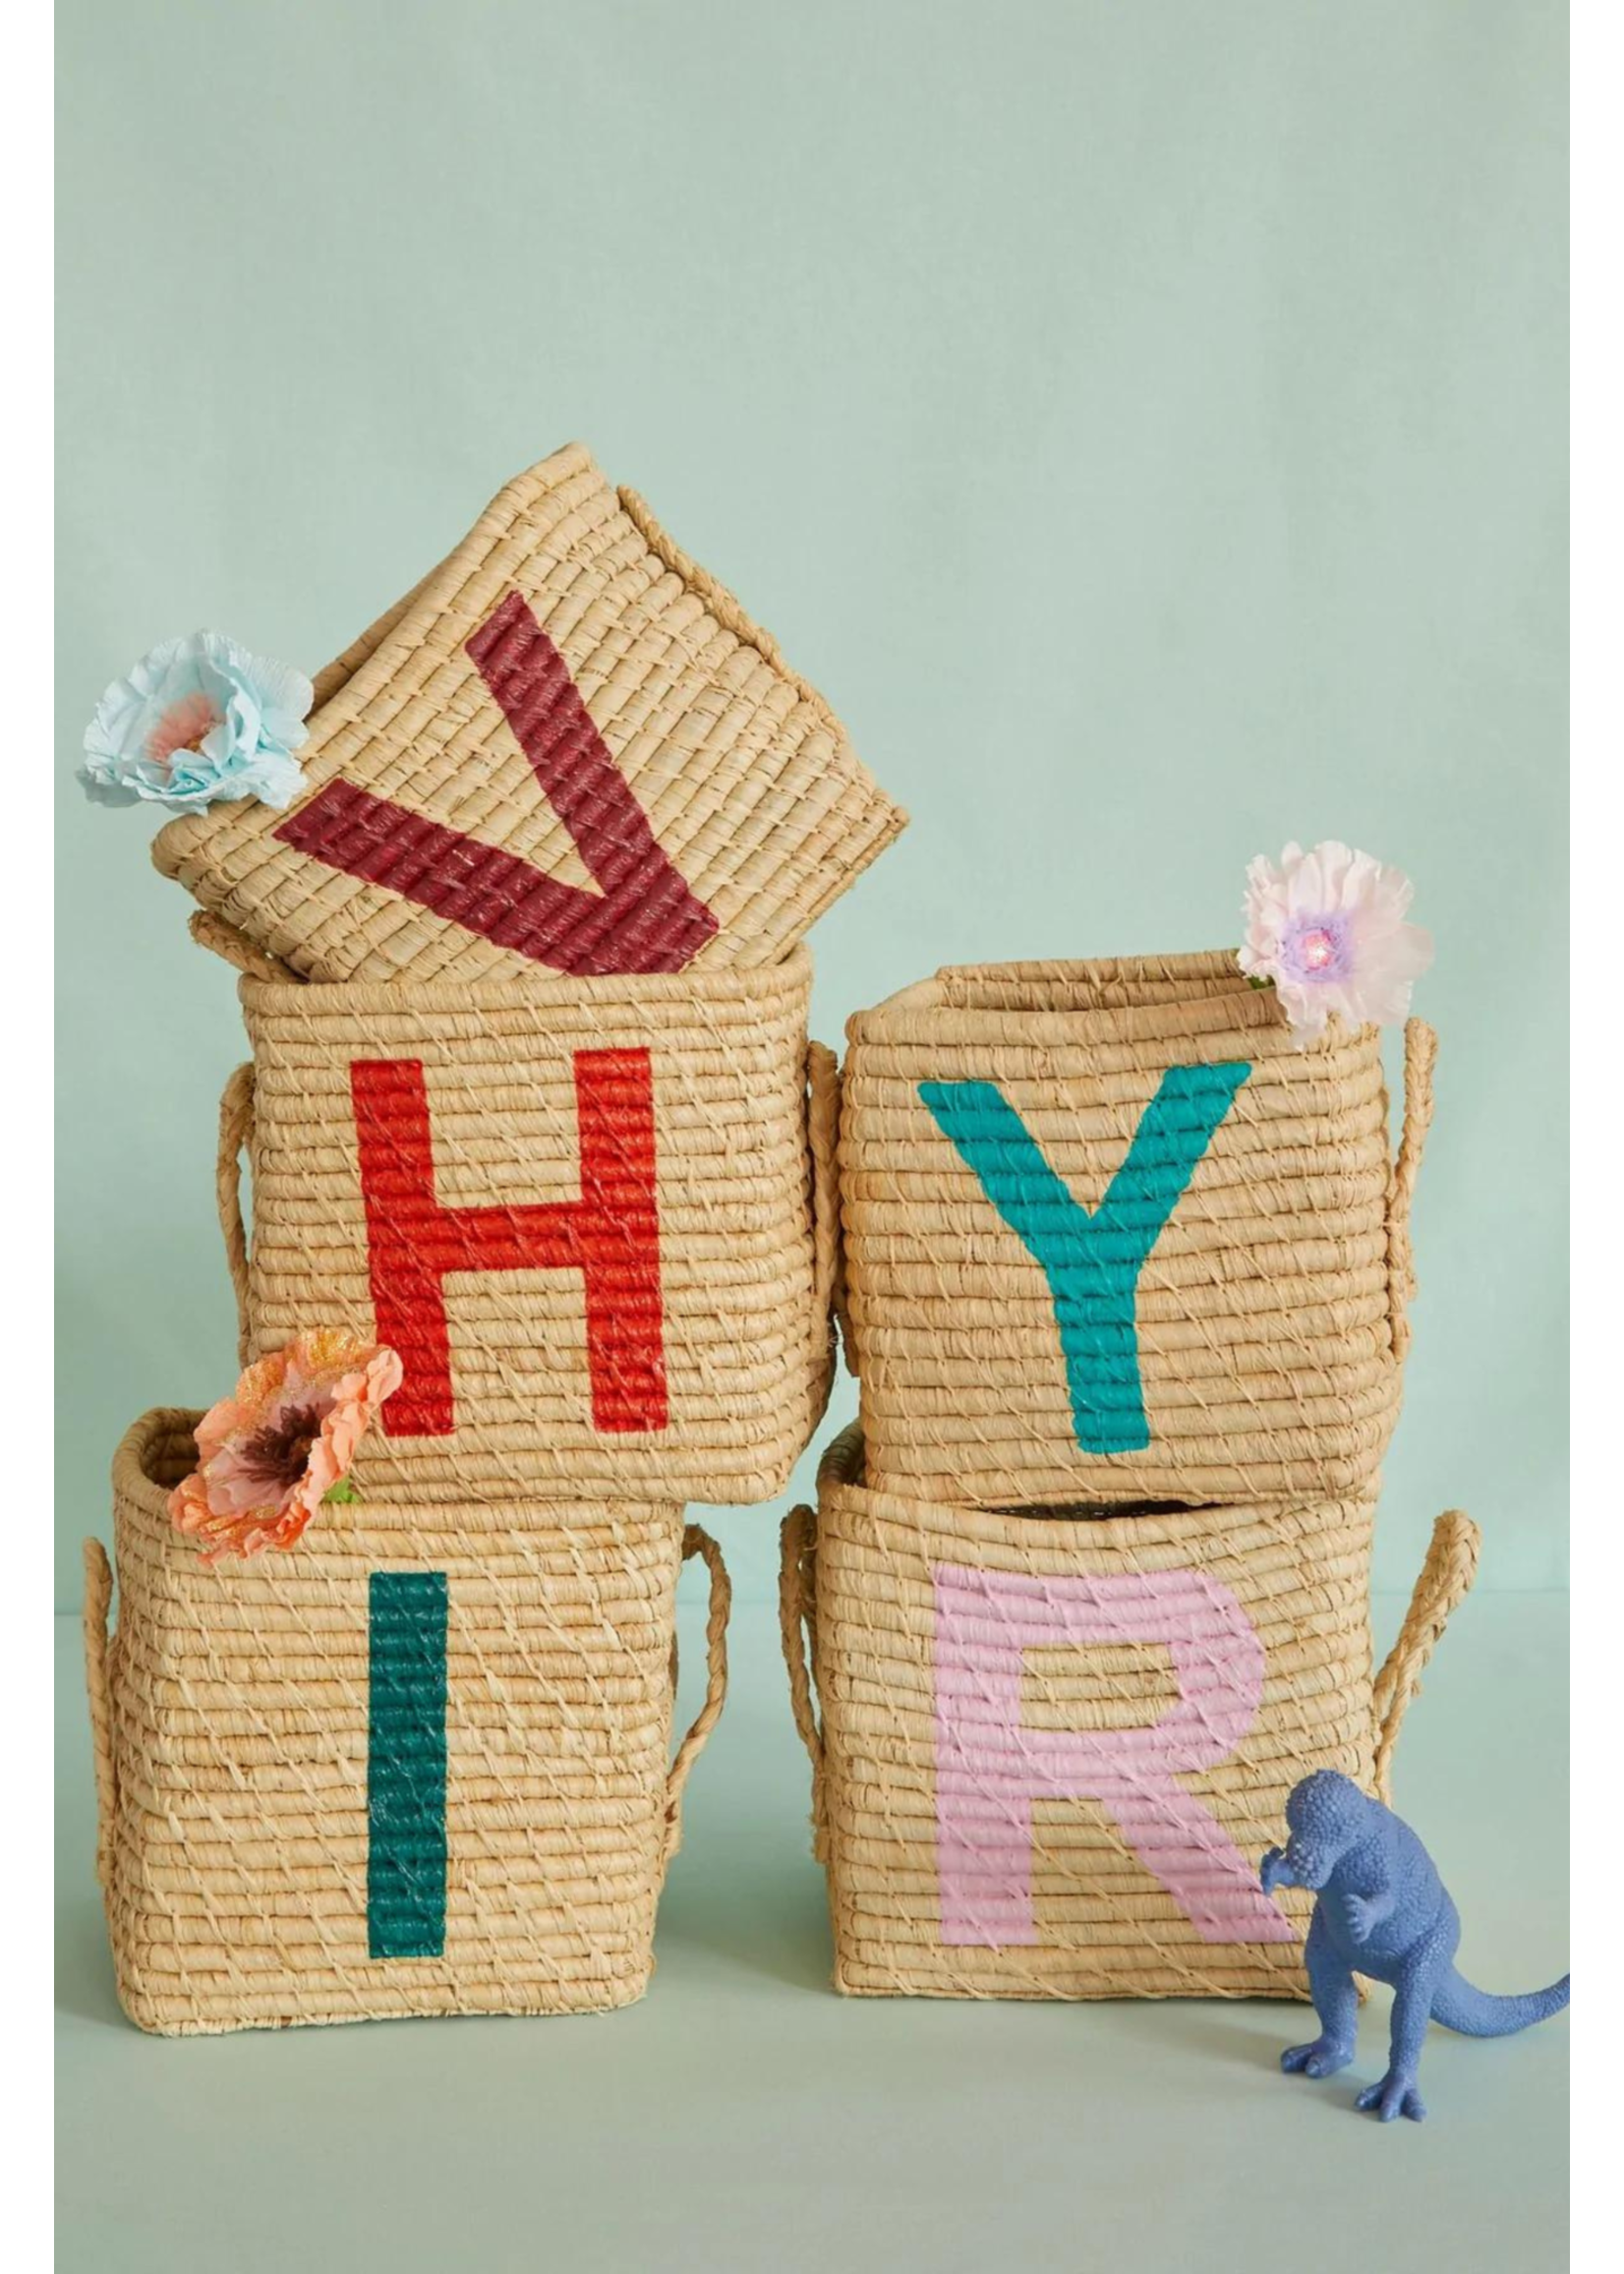 Rice Mand raffia square basket with painted letter N